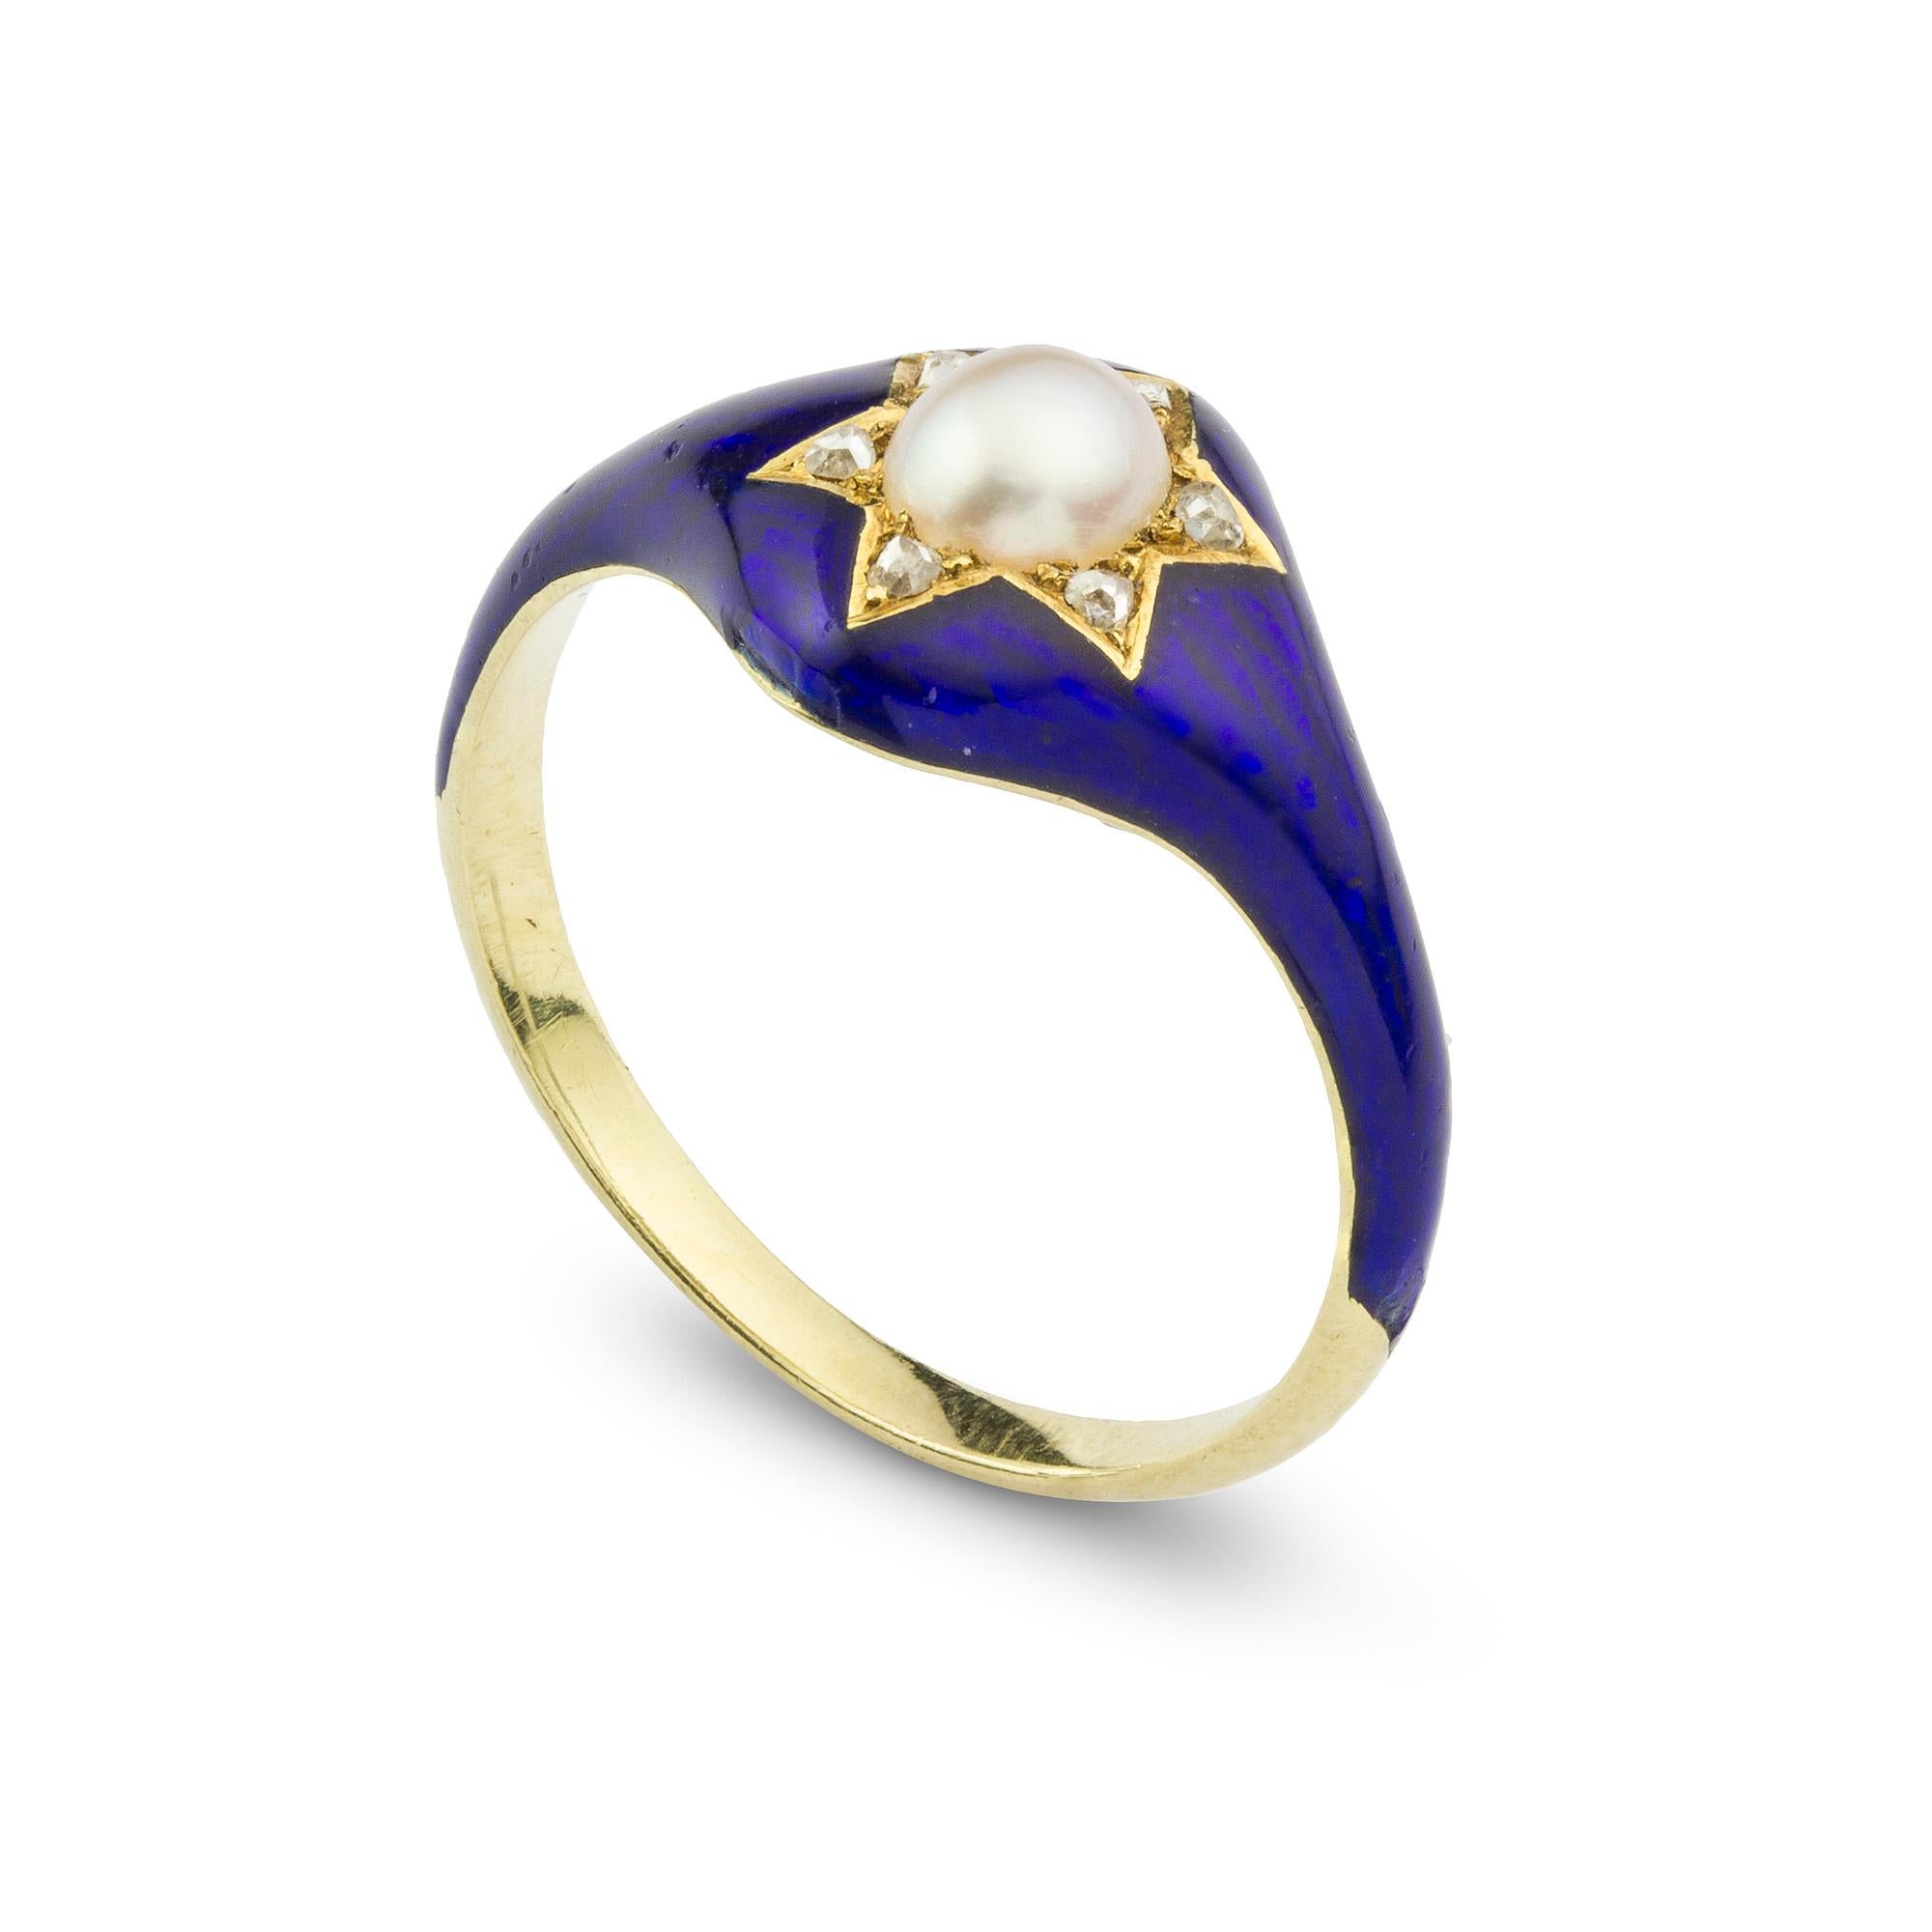 A Victorian gold mounted half pearl, diamond and blue enamel ring, the half pearl measuring approximately 4.4 x 5.1 mm, set to the centre of the star with rose diamond accents, in a blue enamel surround, circa 1850, gross weight 2.5 grams. Finger